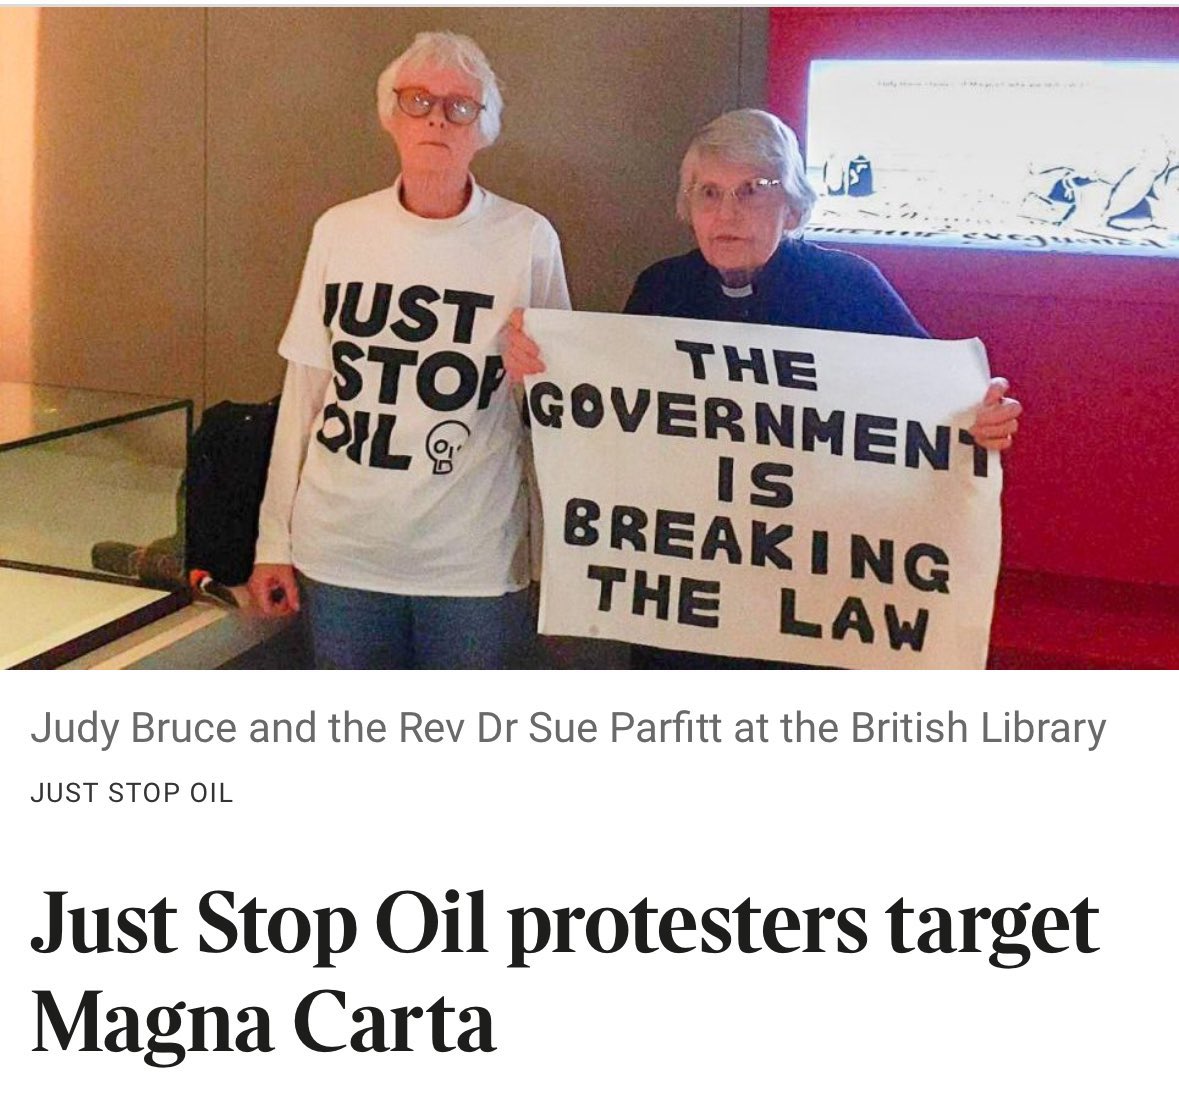 I understand that records show the two activists who attacked the Magna Carta today at the British Library also tried disrupting the original signing ceremony in 1215. If they’re jailed for more than 6 months that could be a life sentence lol.